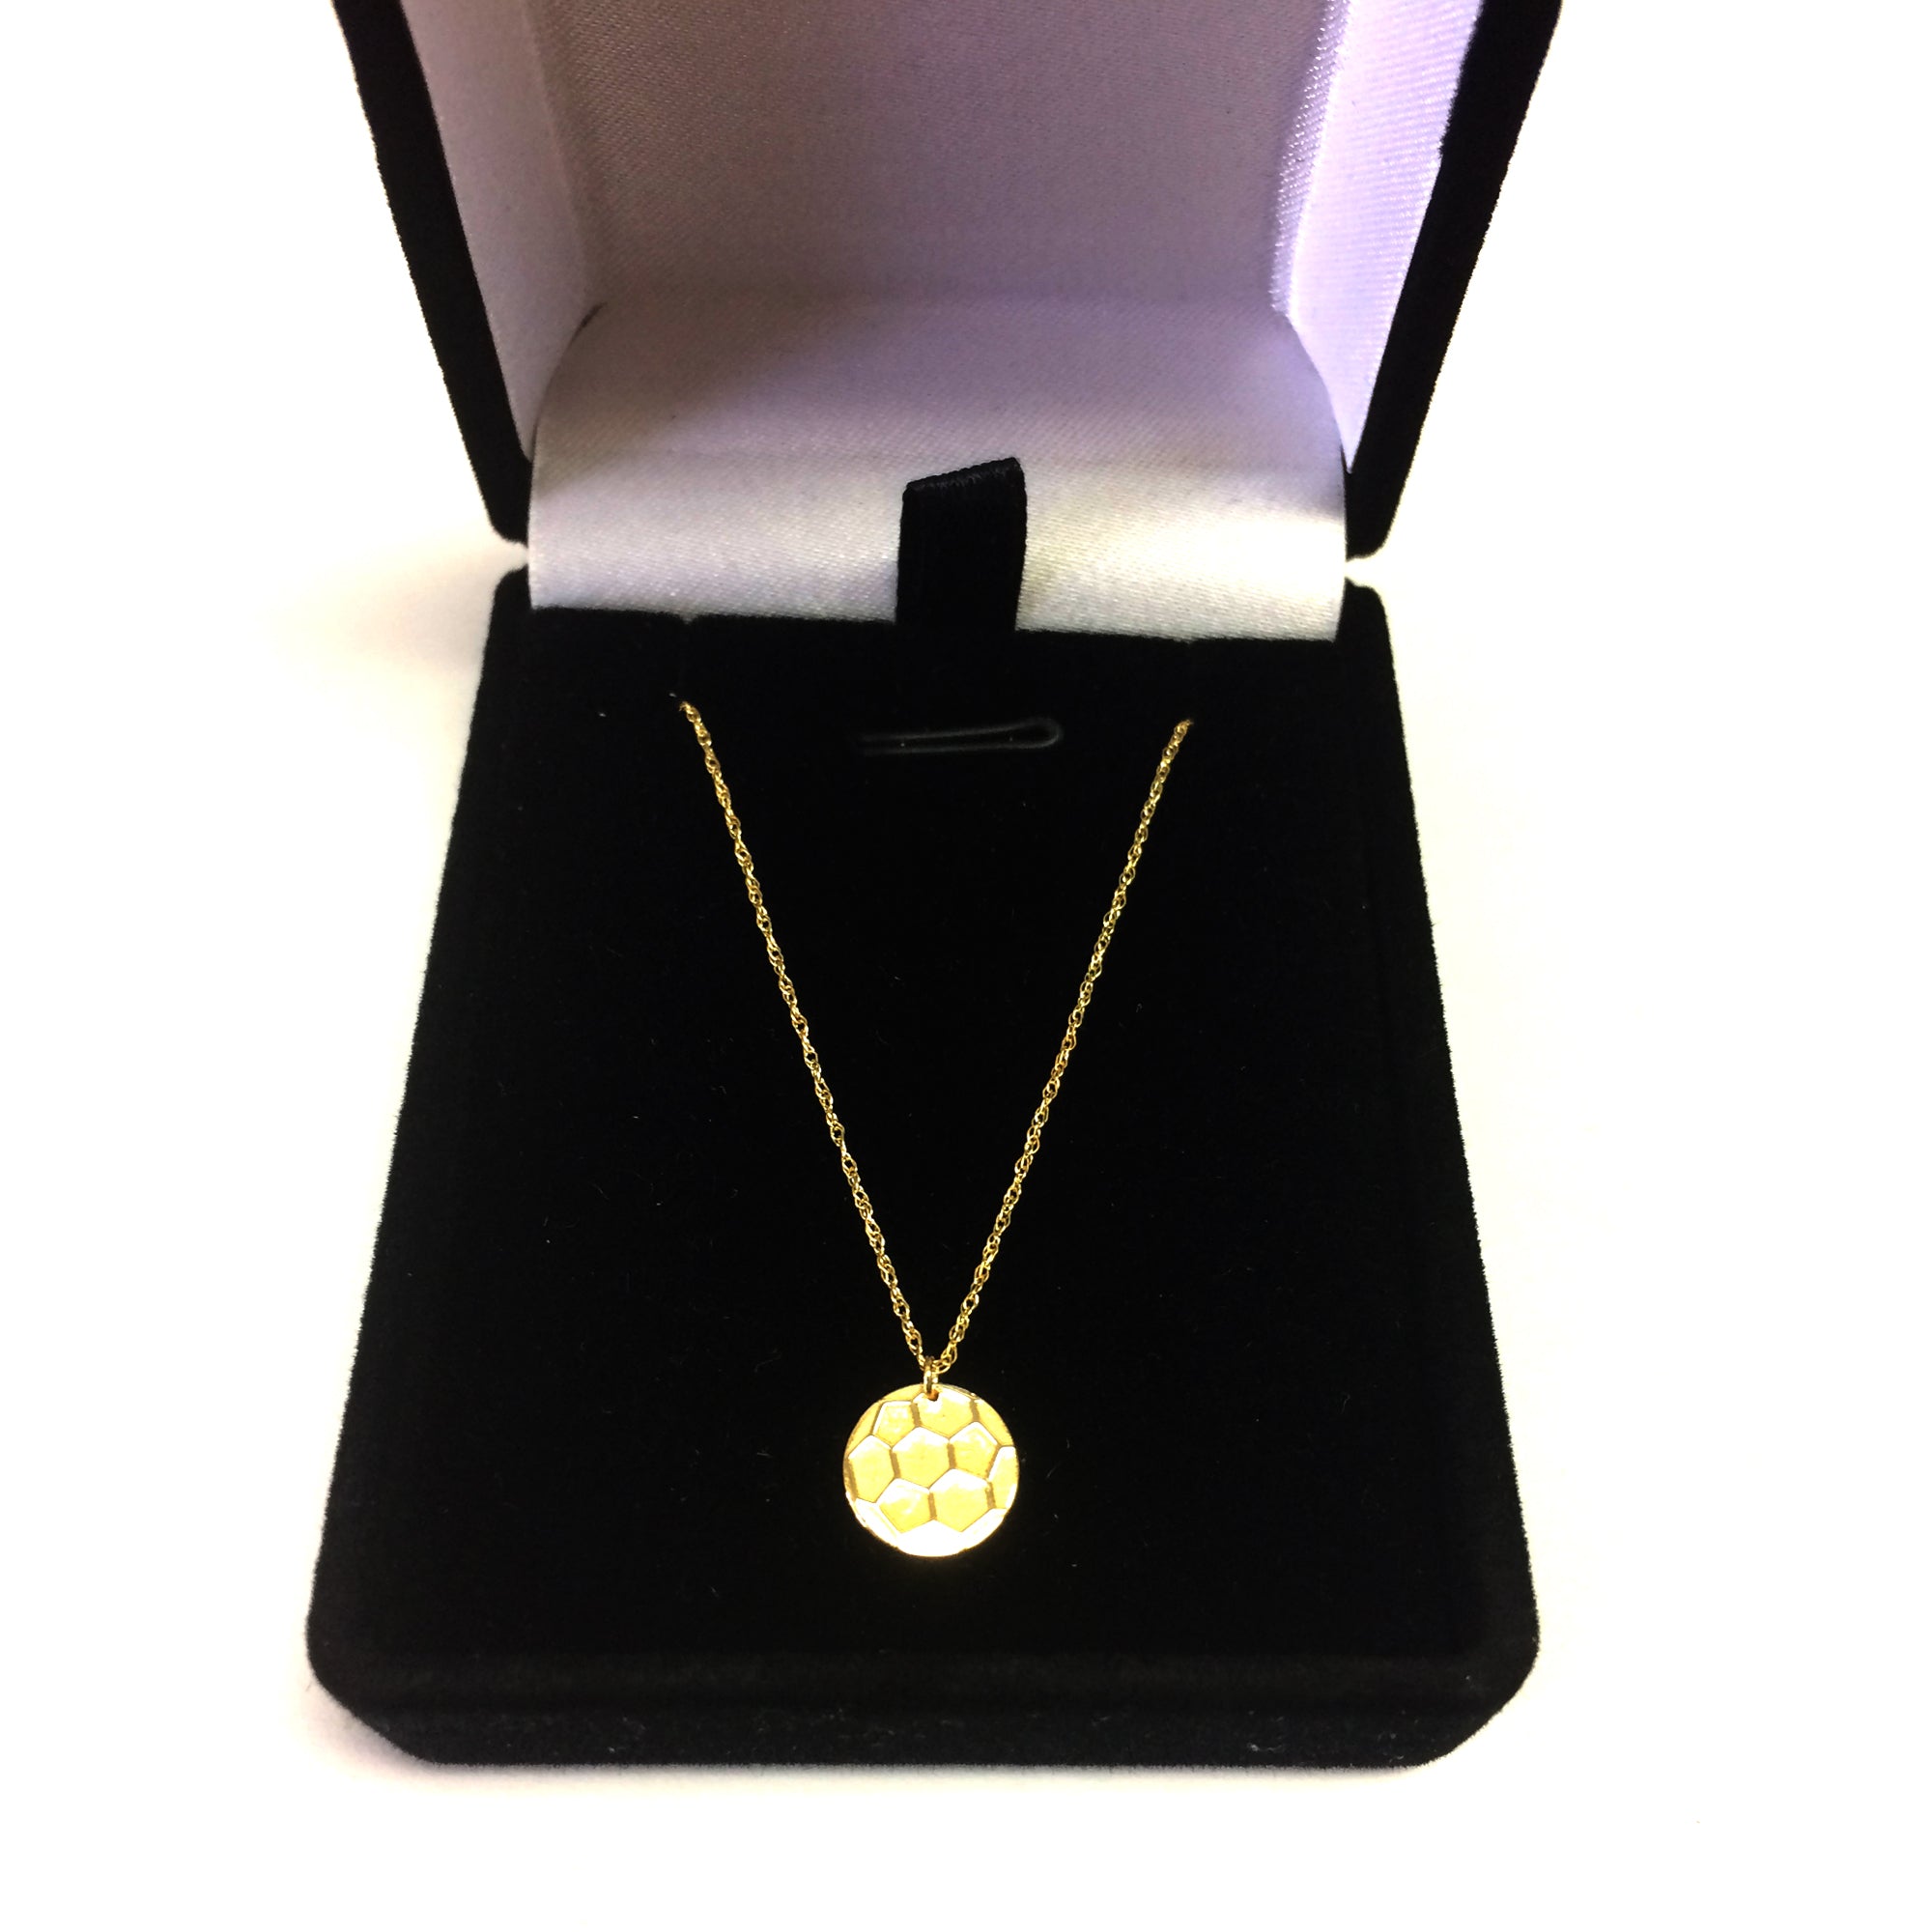 14K Yellow Gold Mini Soccer Ball Pendant Necklace, 16" To 18" Adjustable